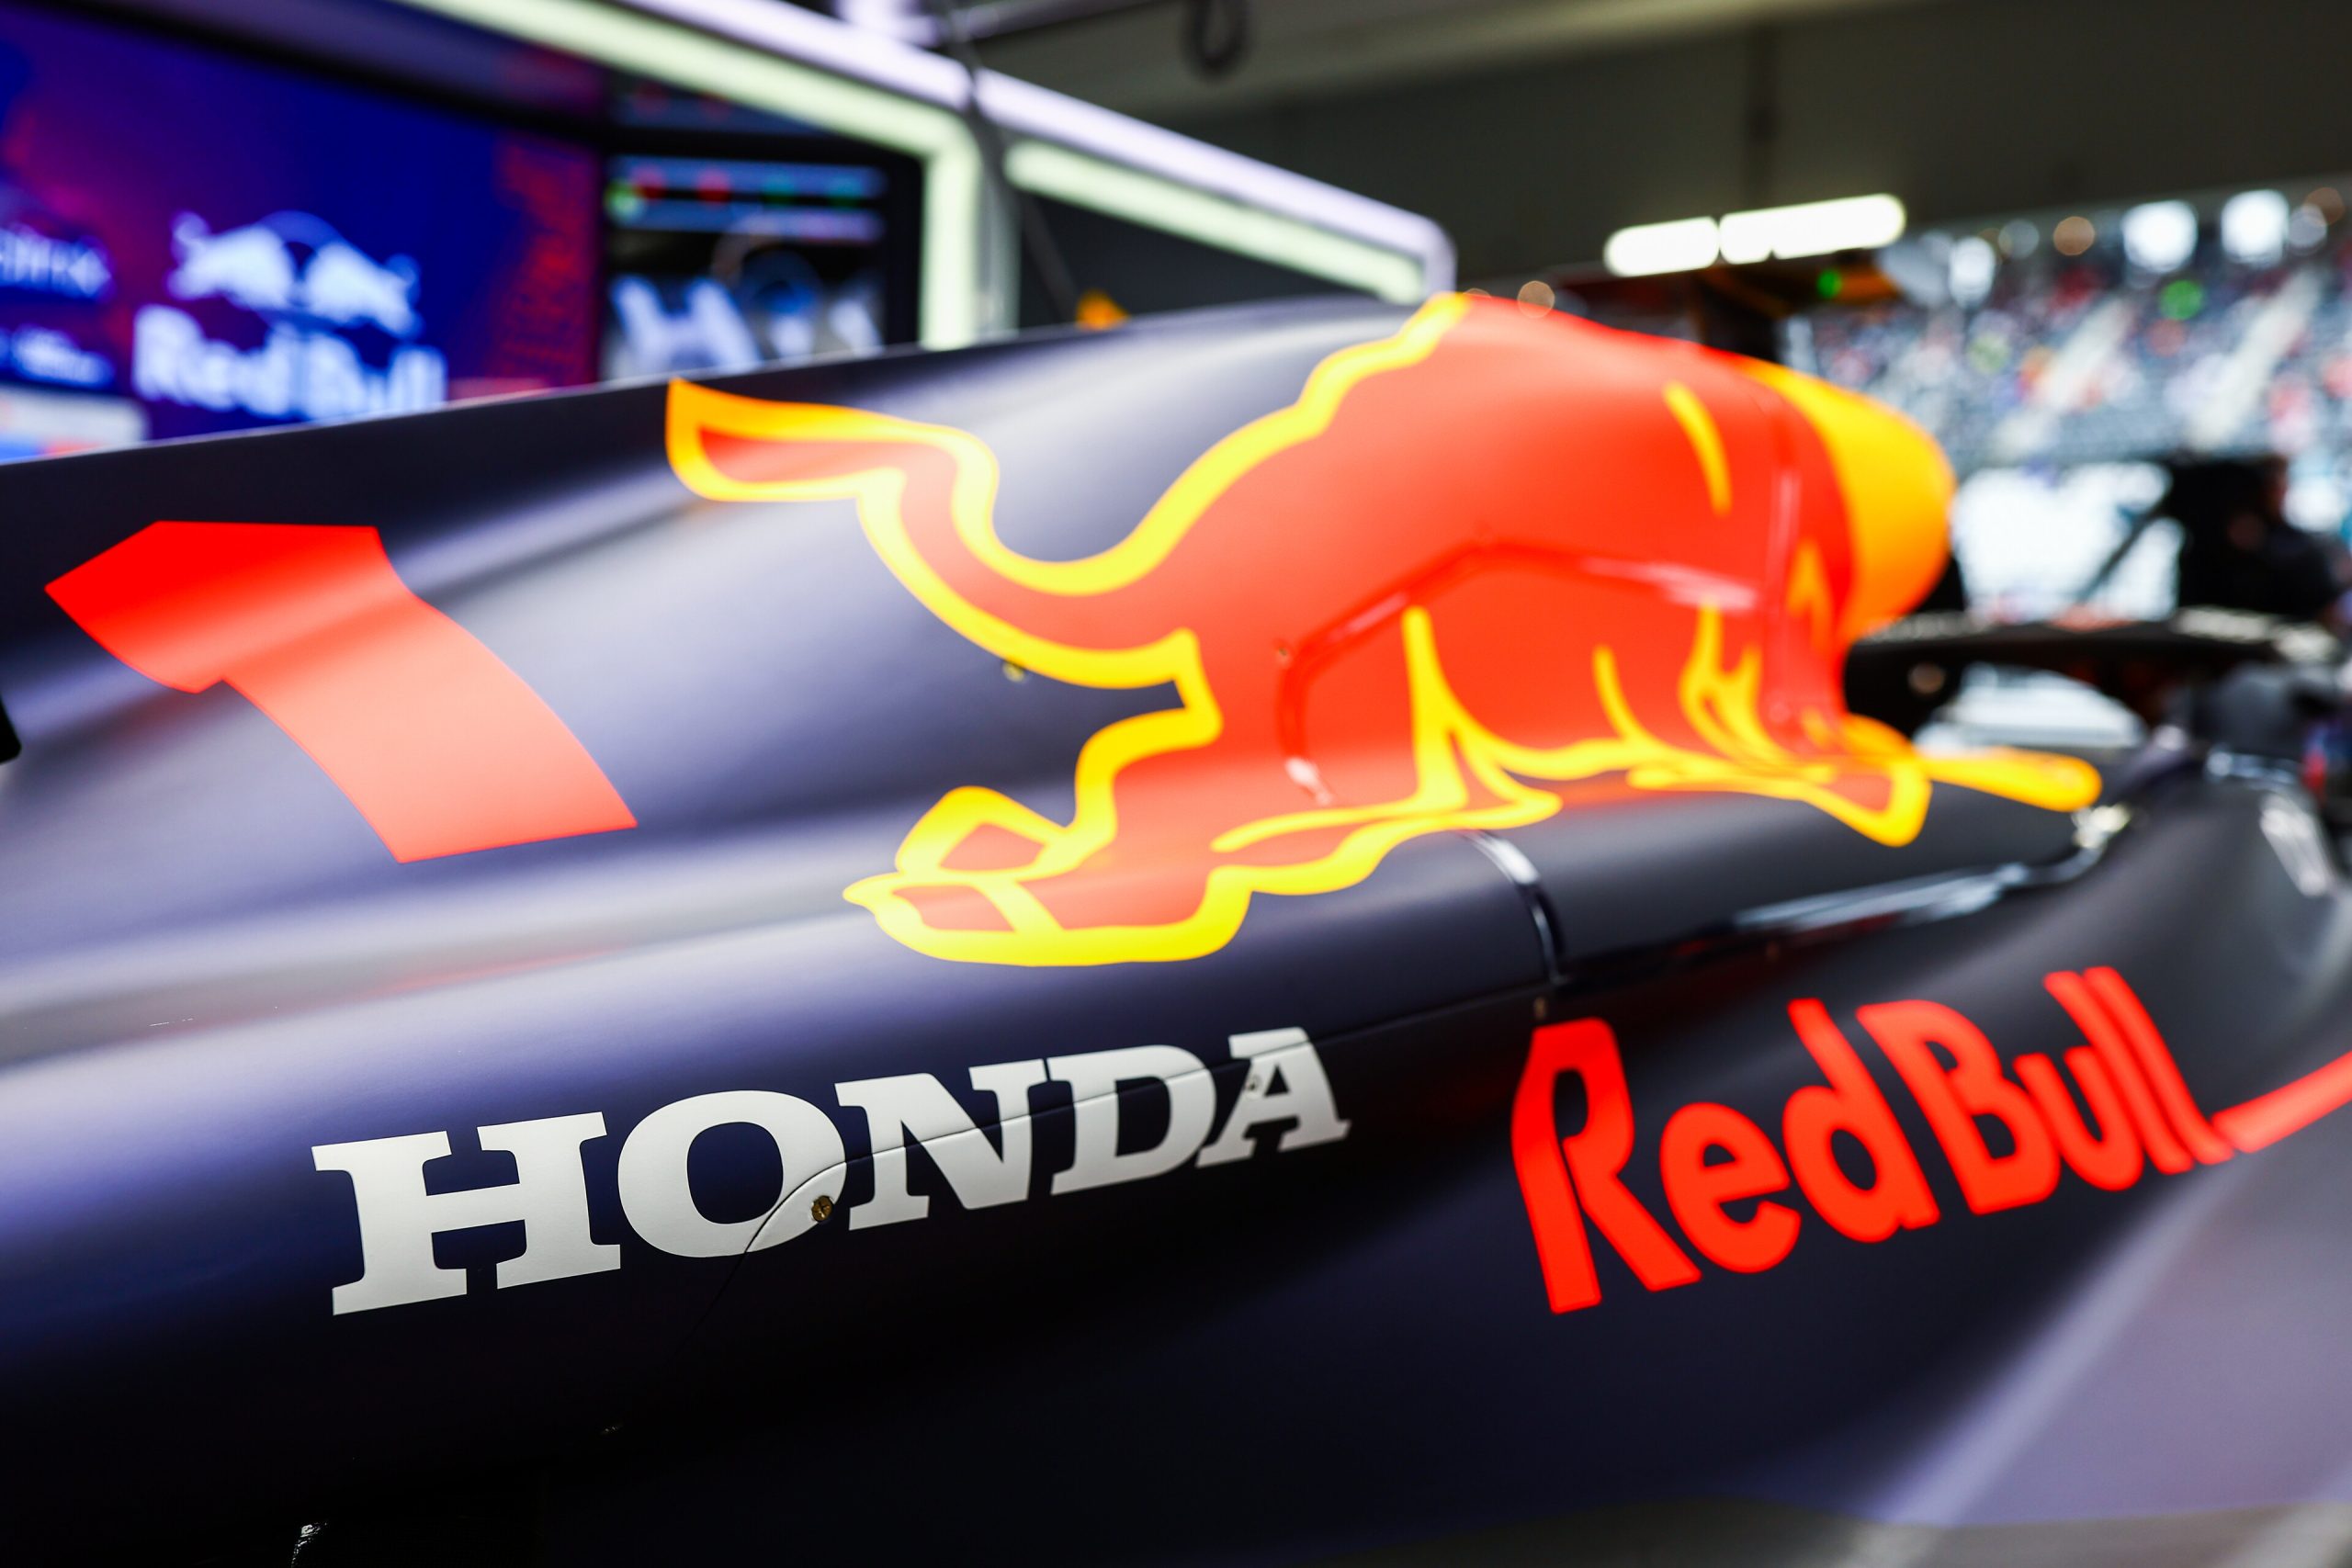 SUZUKA, JAPAN - OCTOBER 07: Honda branding is pictured on the car of Max Verstappen of the Netherlands and Oracle Red Bull Racing in the garage during practice ahead of the F1 Grand Prix of Japan at Suzuka International Racing Course on October 07, 2022 in Suzuka, Japan. (Photo by Mark Thompson/Getty Images) // Getty Images / Red Bull Content Pool // SI202210070148 // Usage for editorial use only //